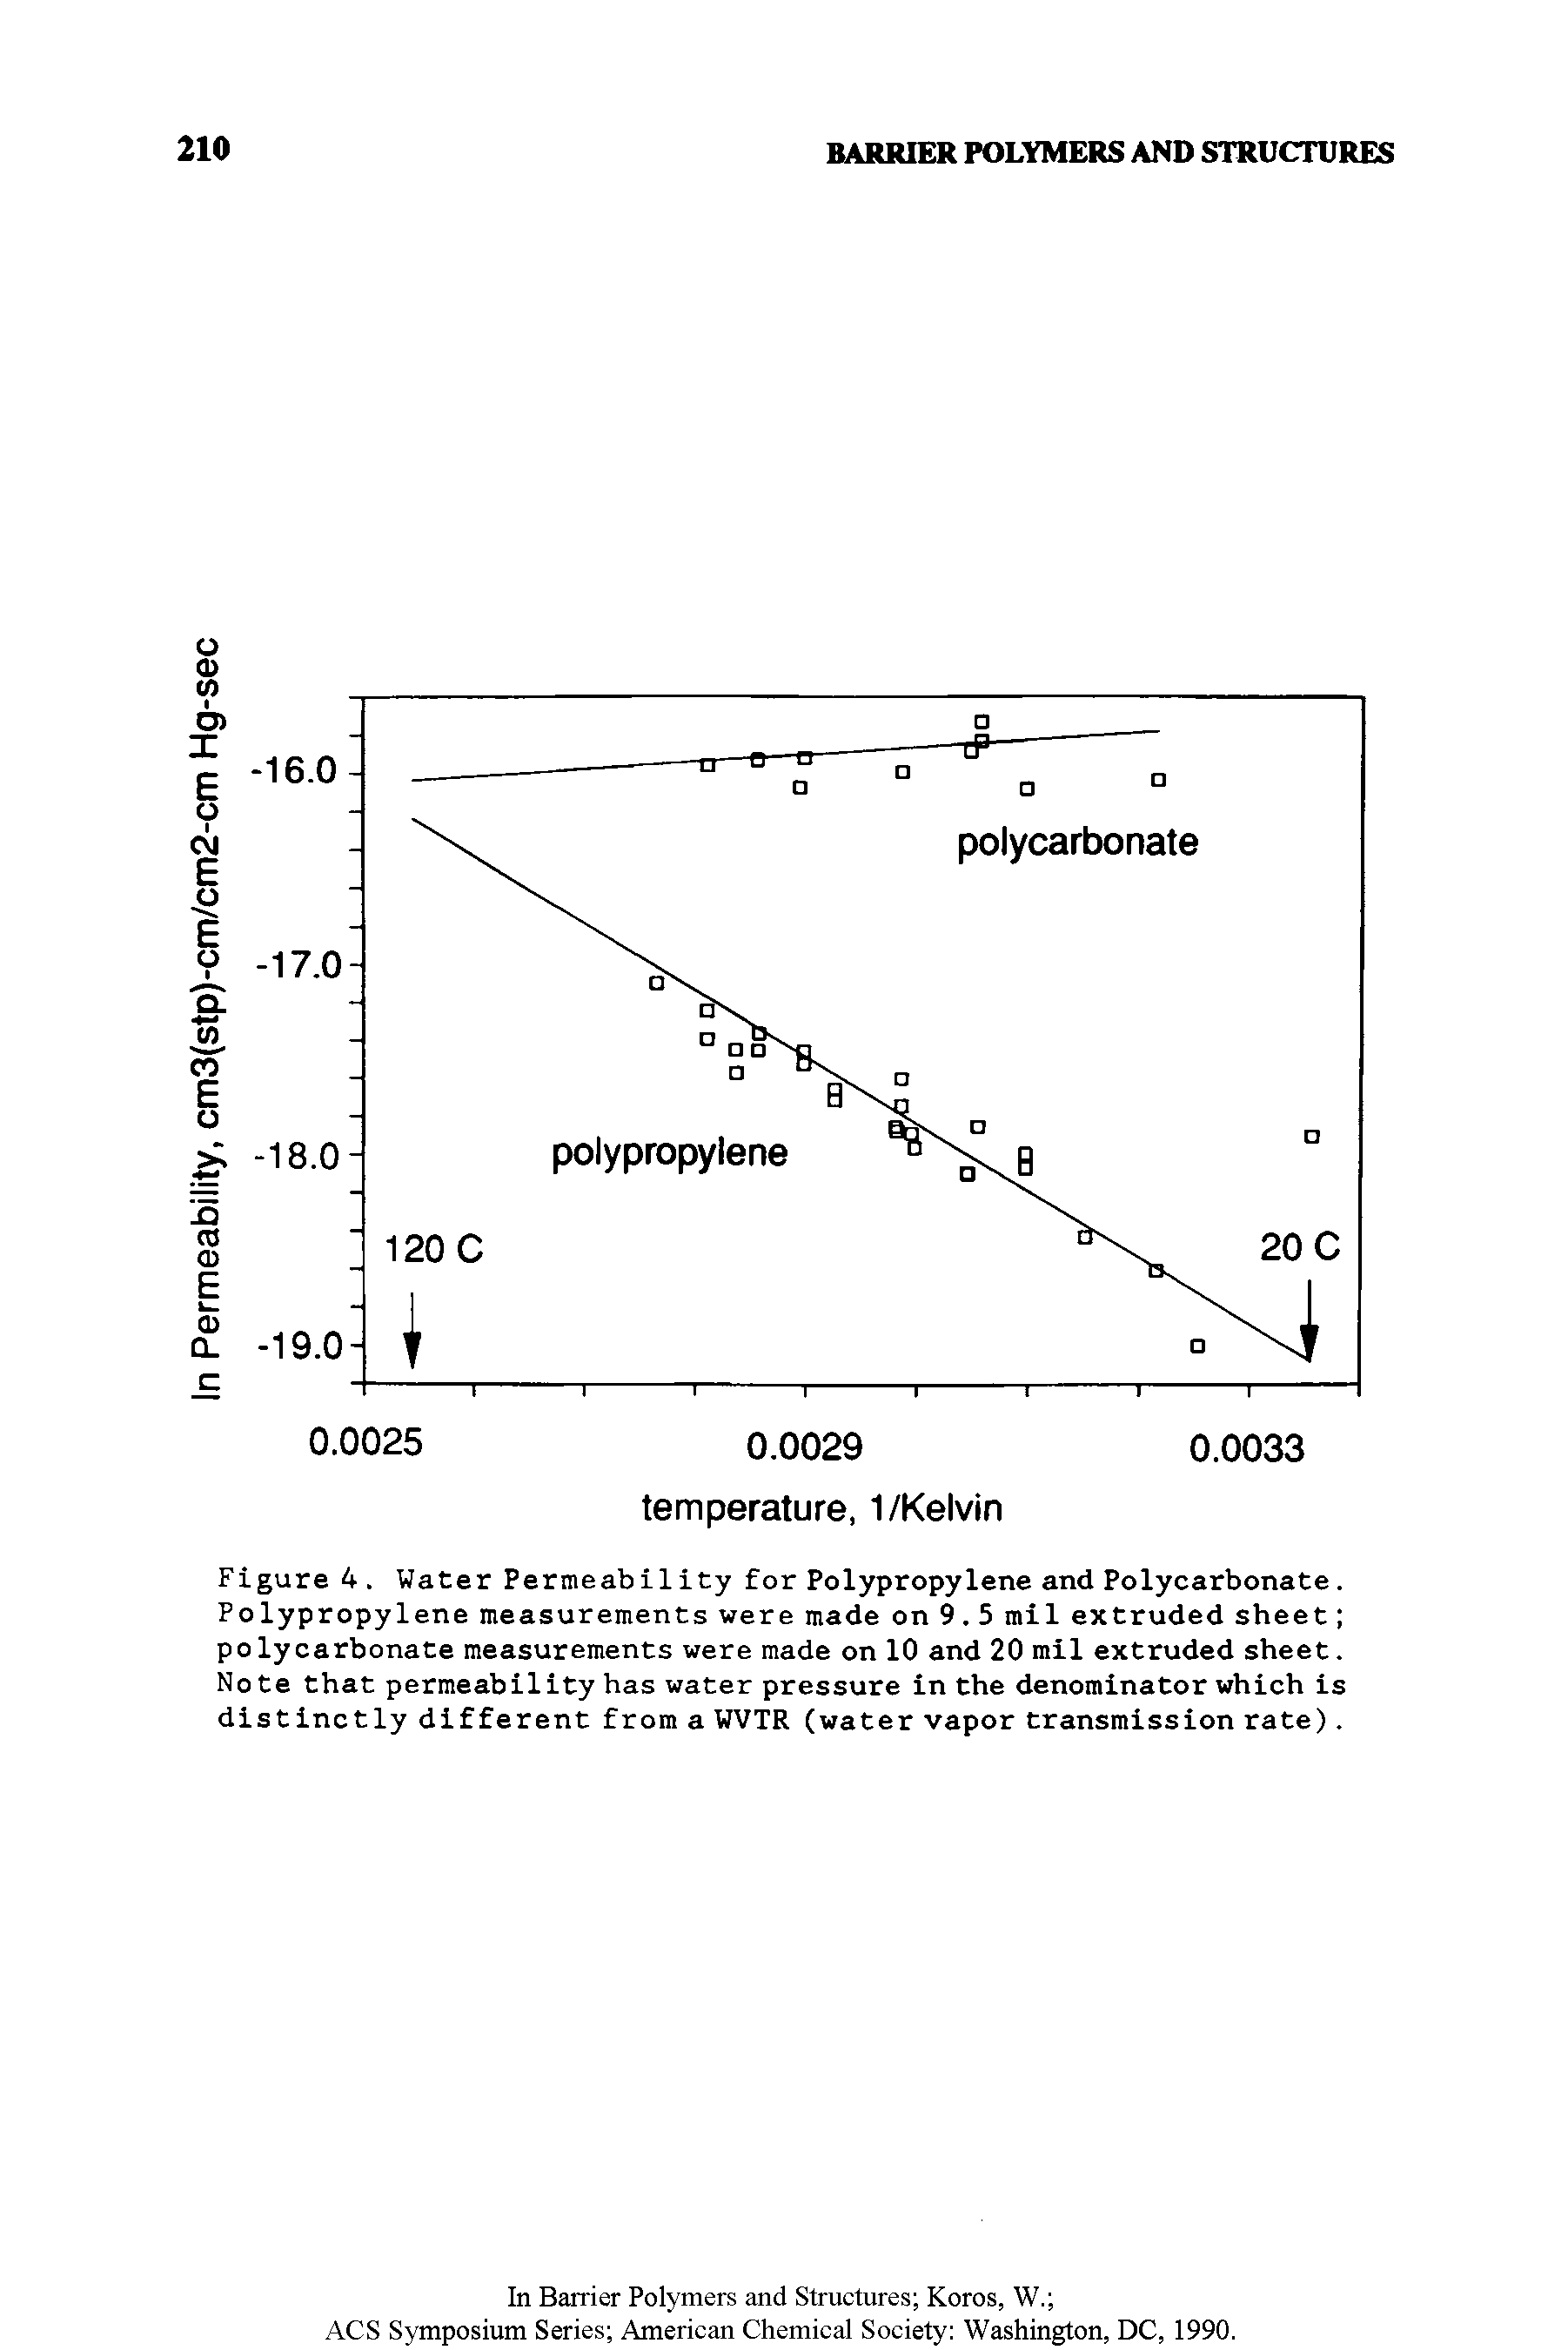 Figure 4. Water Permeability for Polypropylene and Polycarbonate. Polypropylene measurements were made on 9.5 mil extruded sheet polycarbonate measurements were made on 10 and 20 mil extruded sheet. Note that permeability has water pressure in the denominator which is distinctly different from a WVTR (water vapor transmission rate).